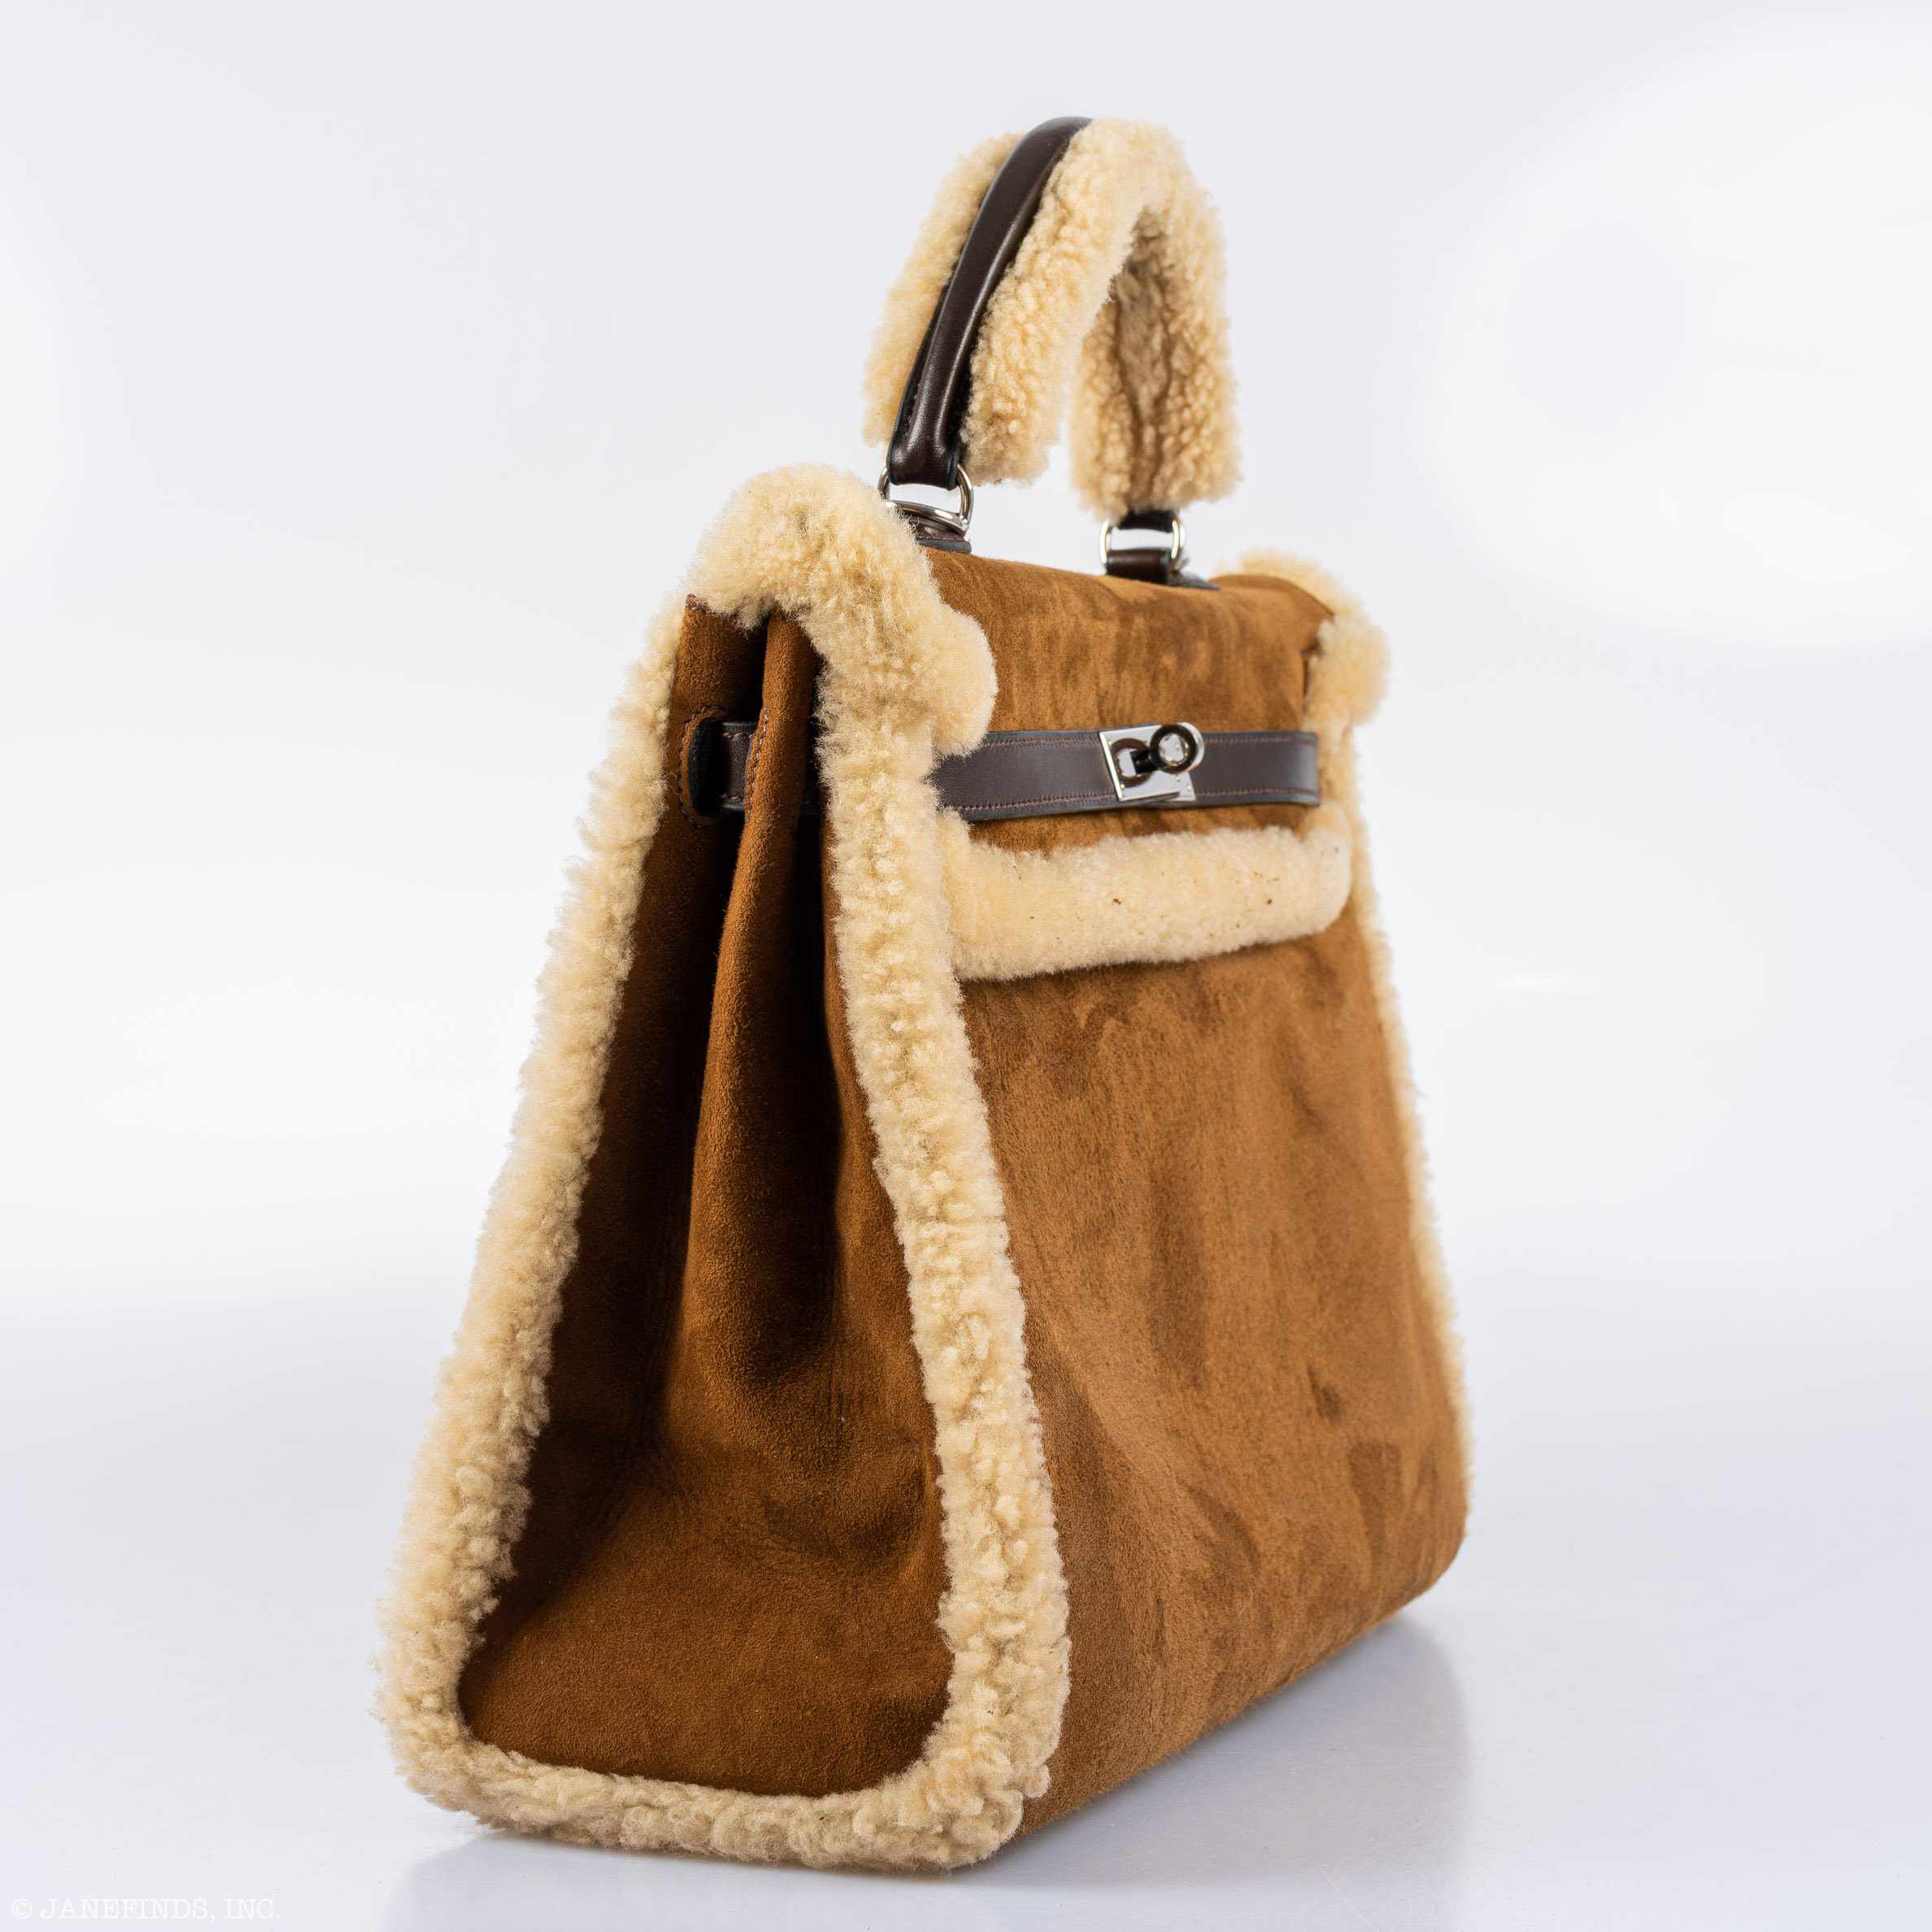 Hermès Teddy Kelly 35 Fauve Doblis Suede and Mouton Shearling Palladium Hardware